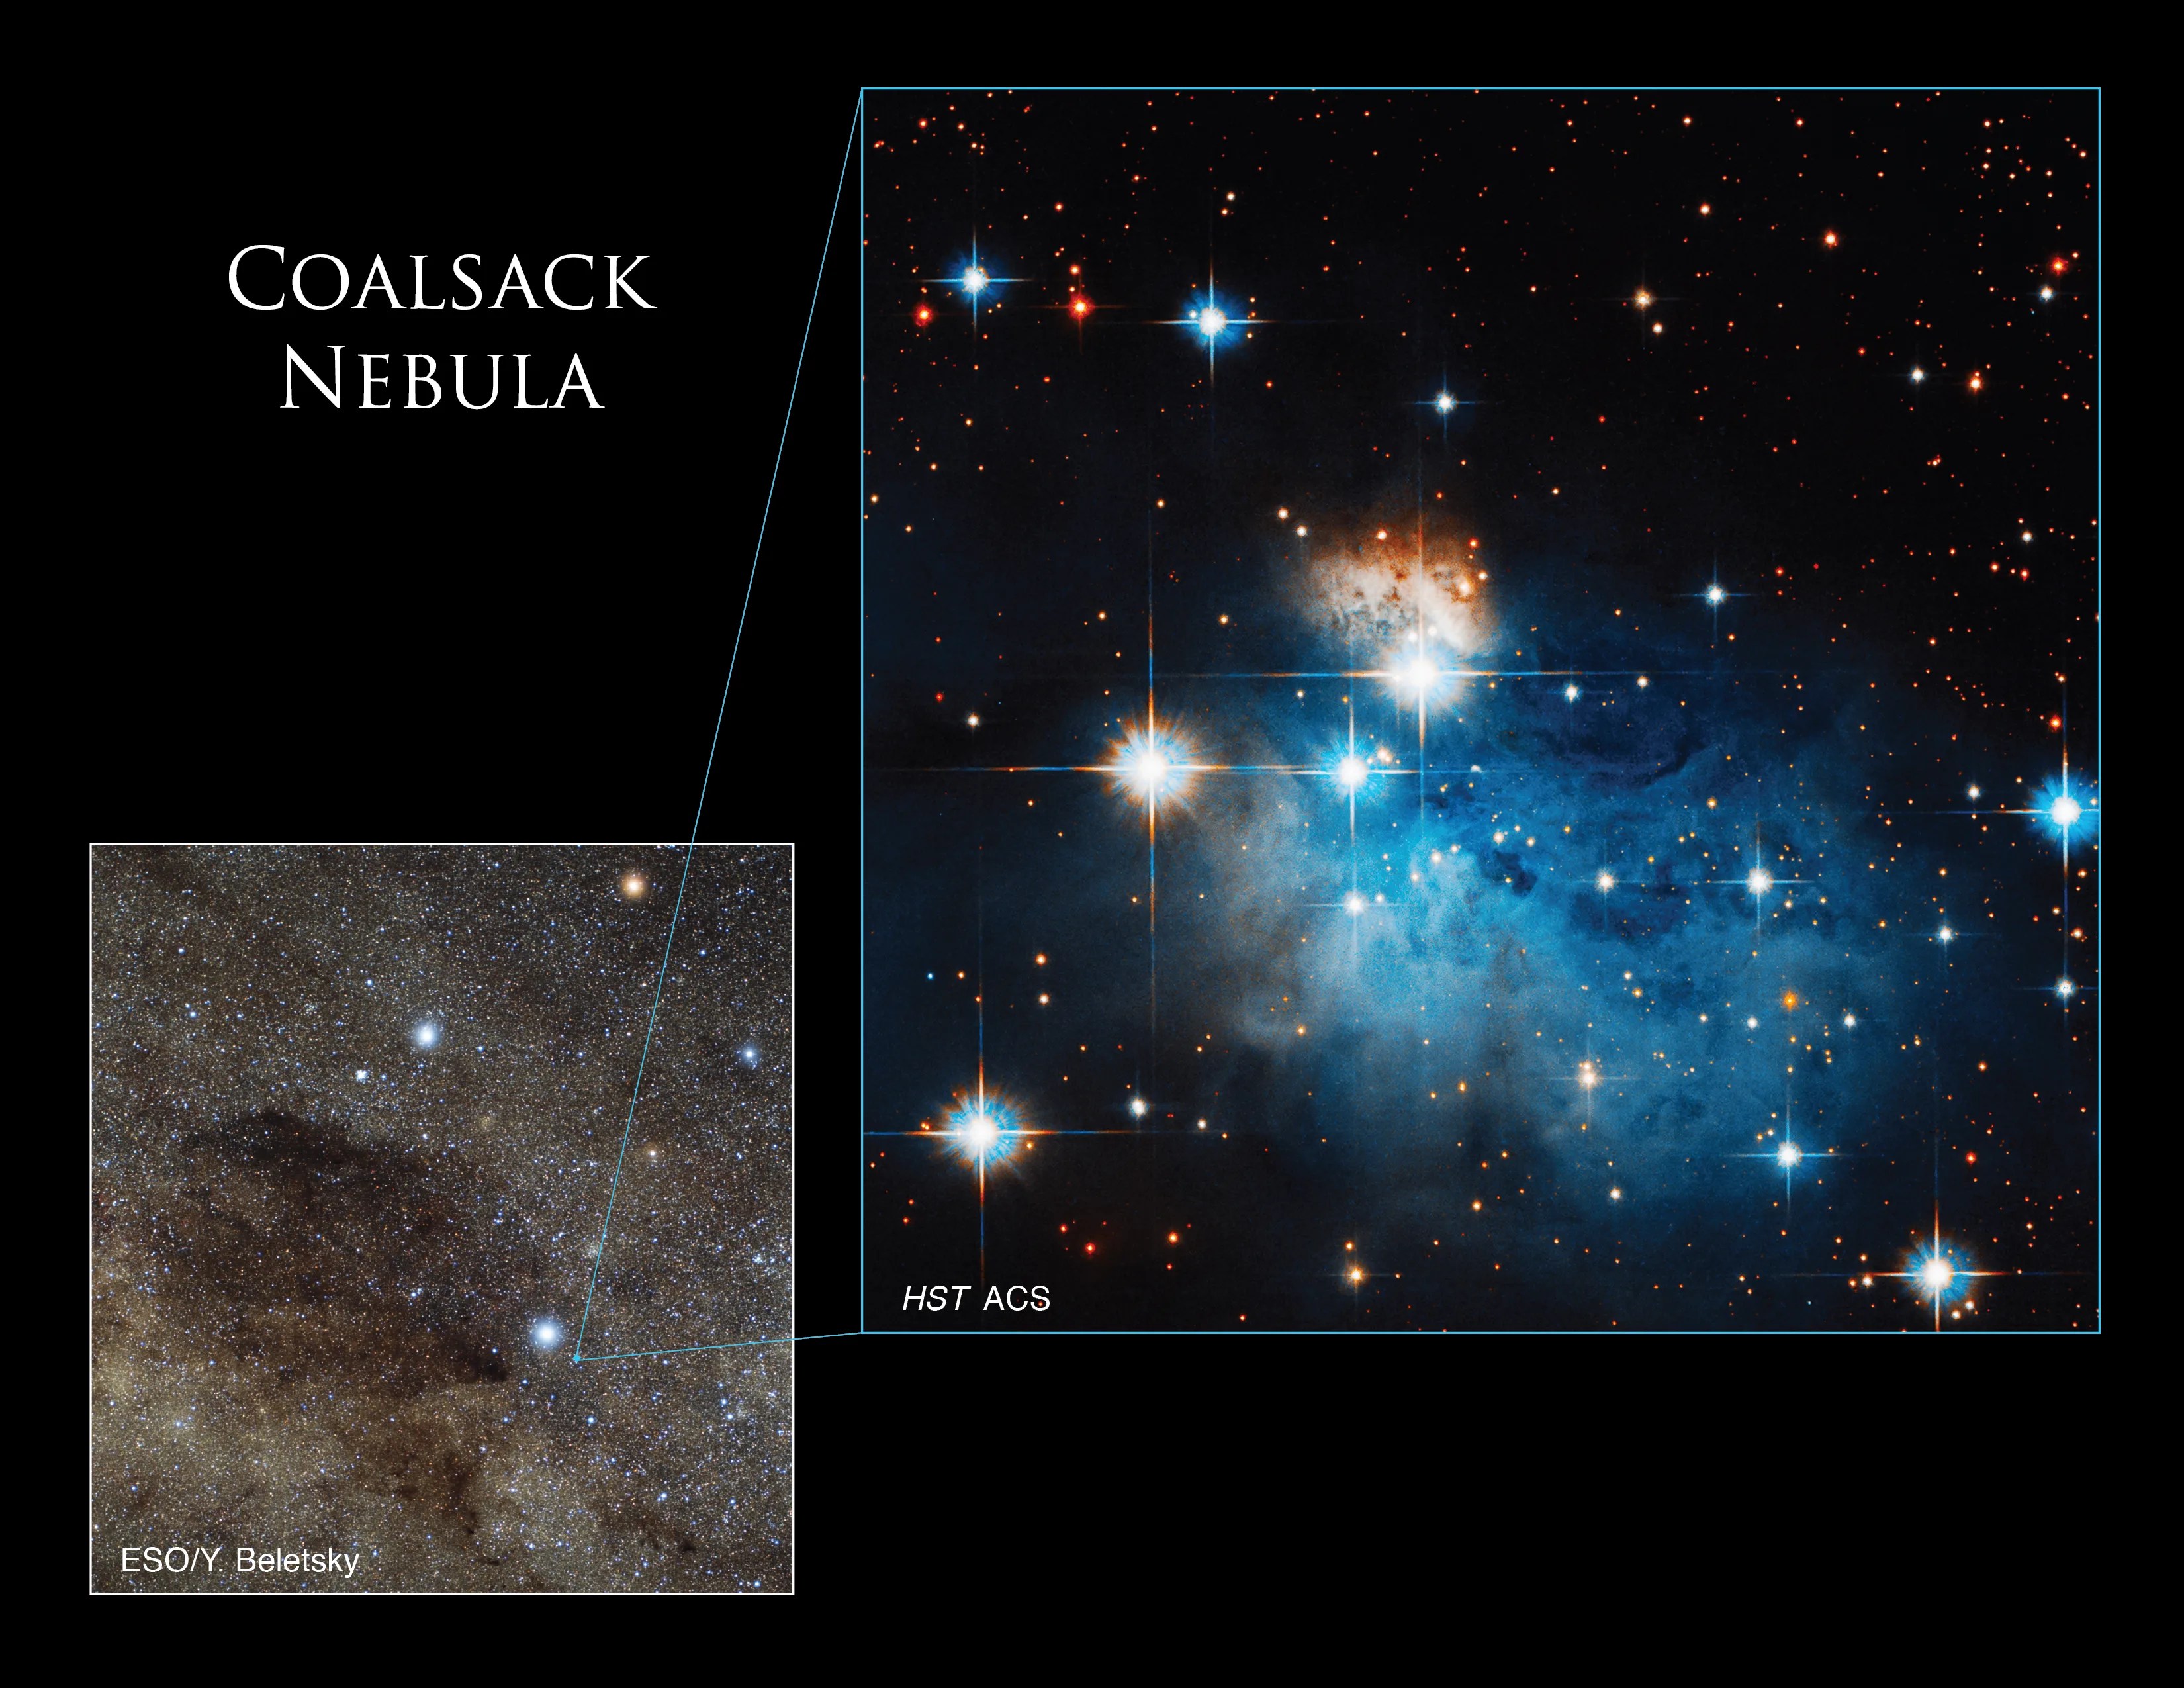 To the left is an ESO image of dark nebulous gas and stars that pinpoints the location of the Hubble image on the right. To the right is the Hubble image.